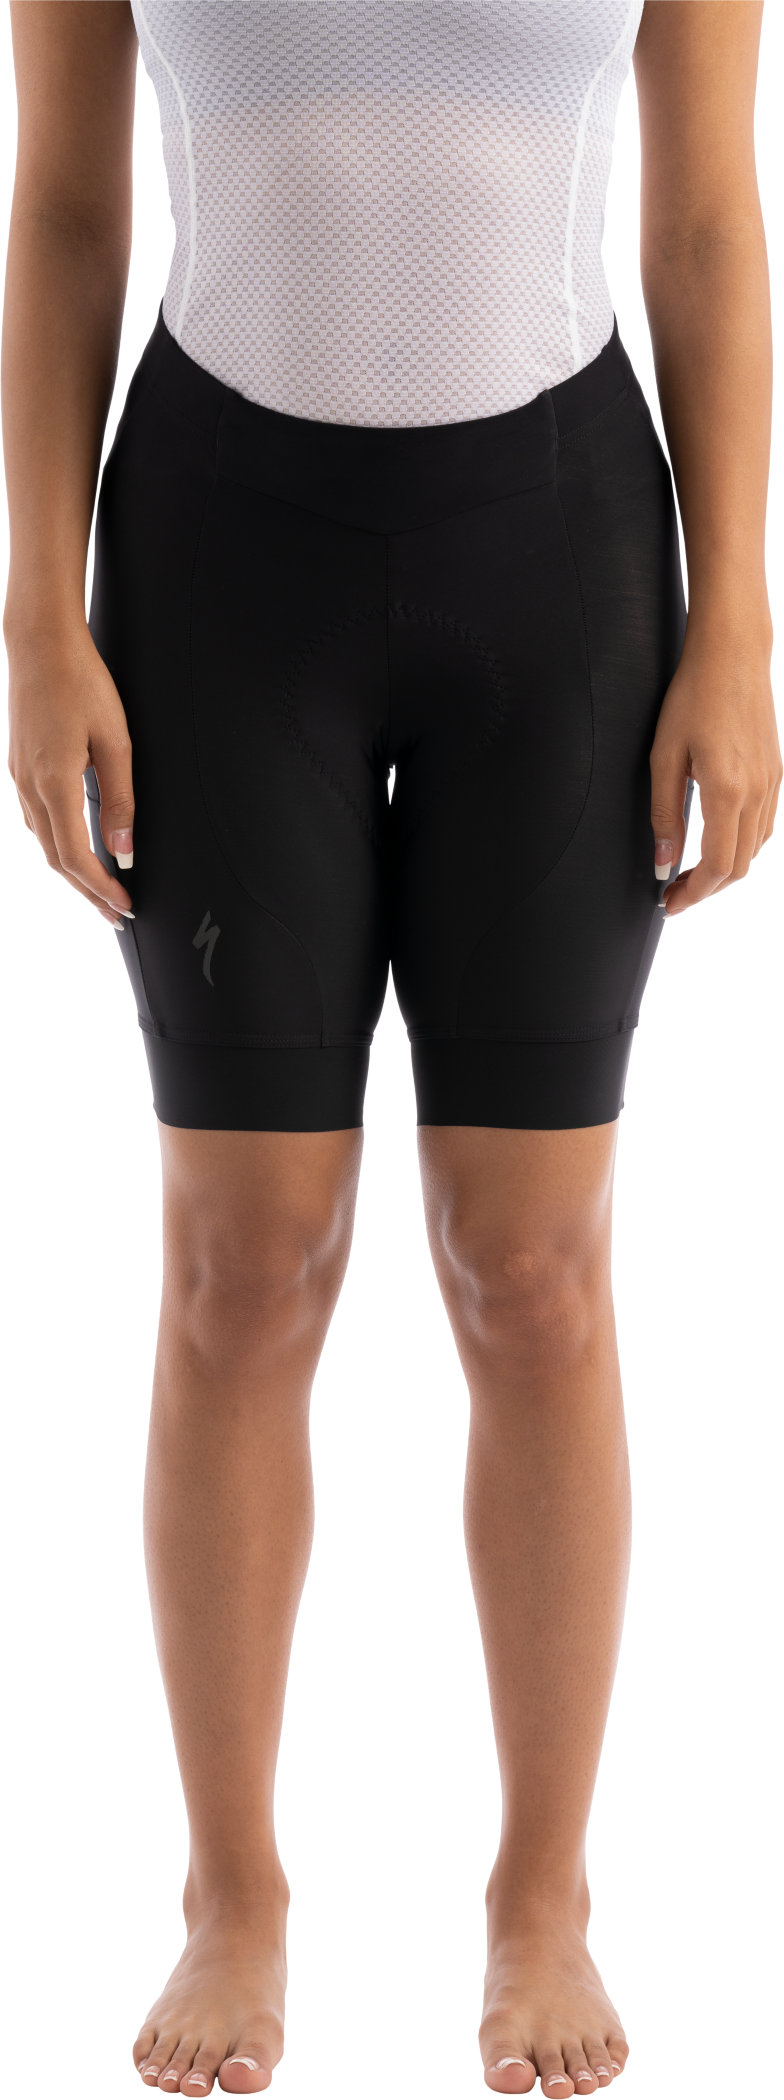 Women's RBX Shorts with SWAT 